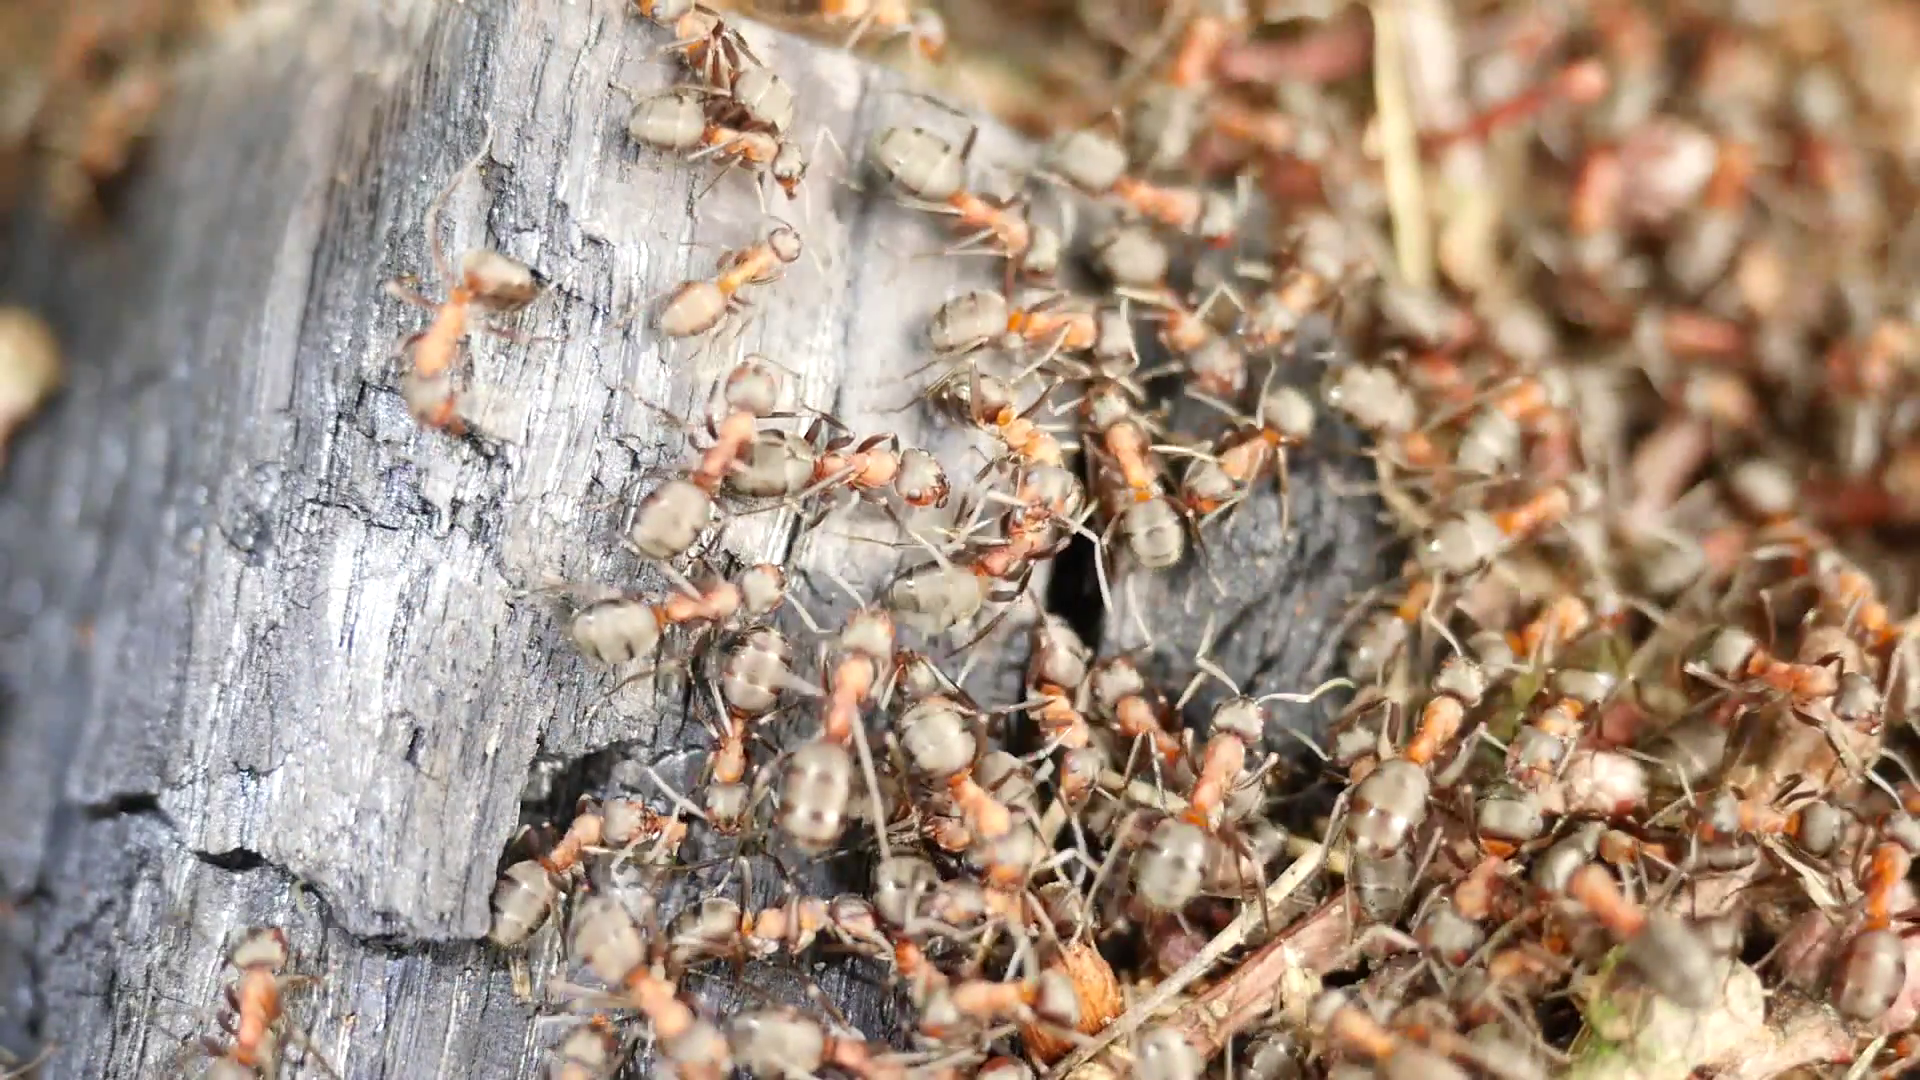 FullHD, wild ants build their anthill, big piece of charred wood ...